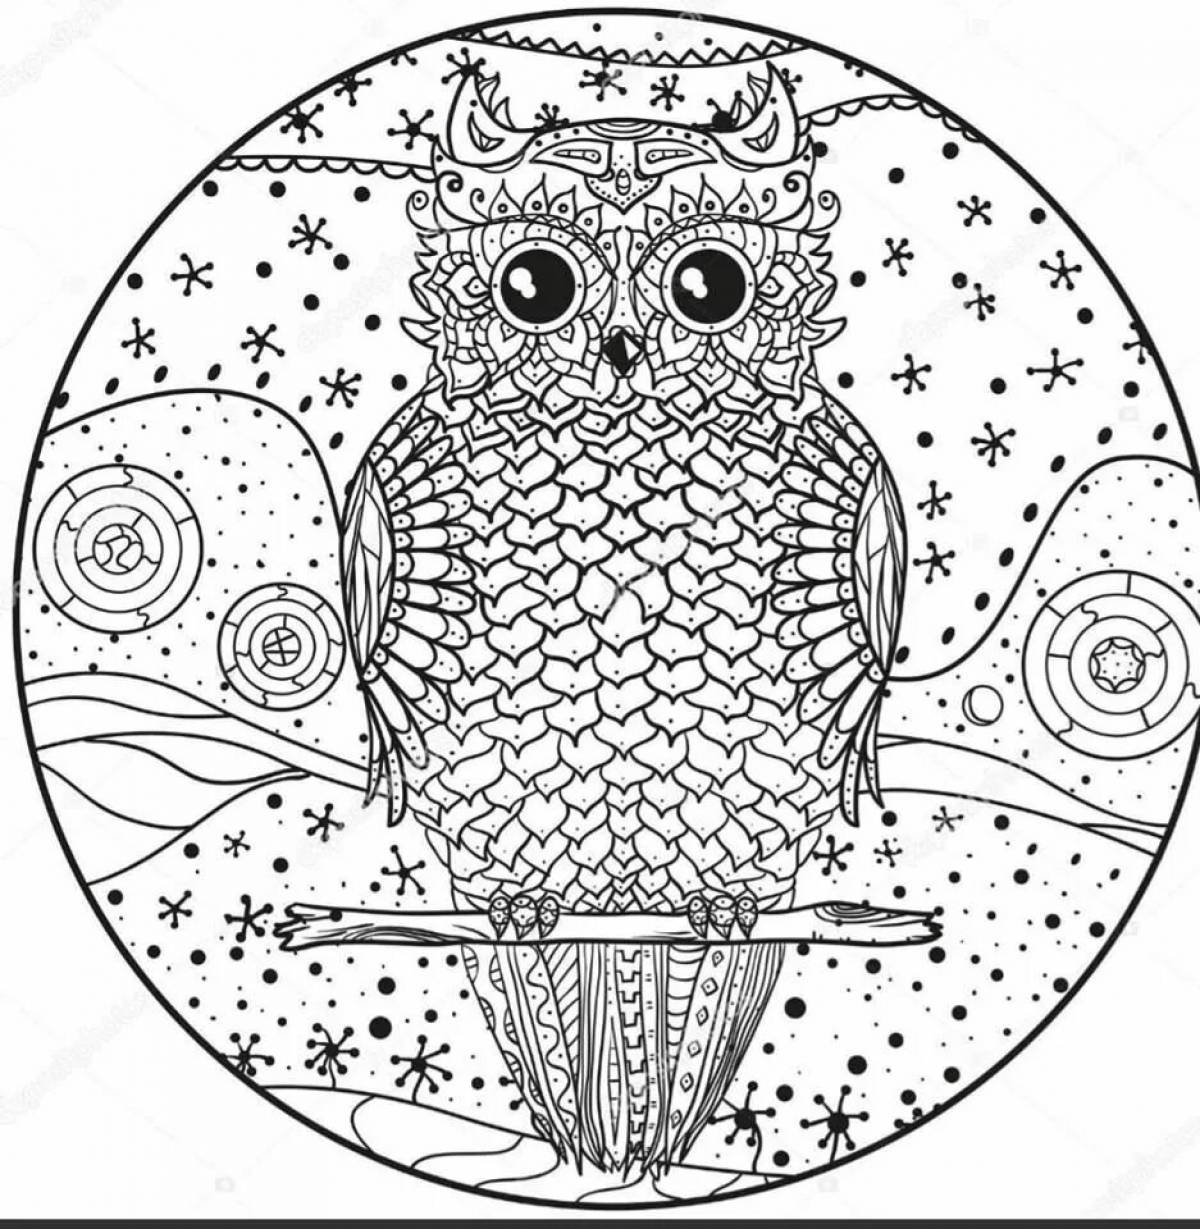 Coloring page energetic anti-stress owls